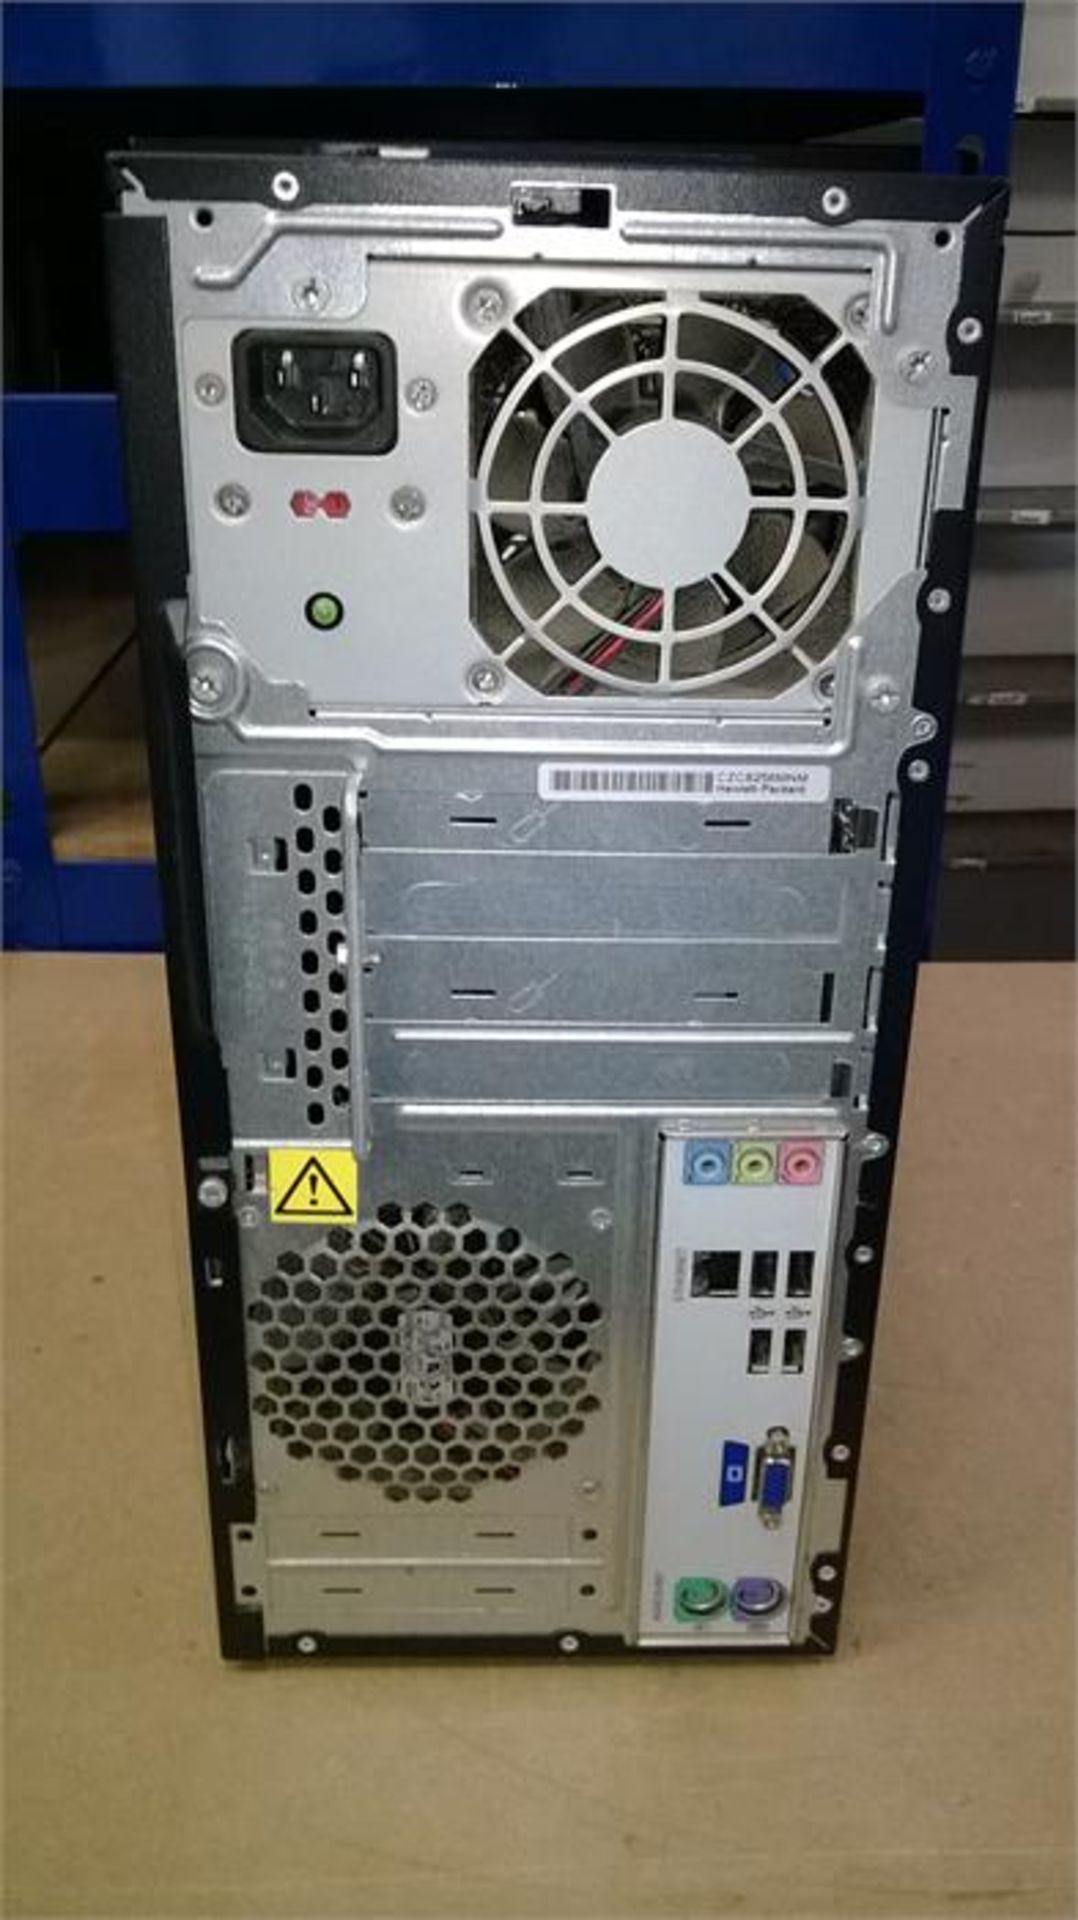 ASR3717 HP/Compaq DX2400S Tower - Image 2 of 2